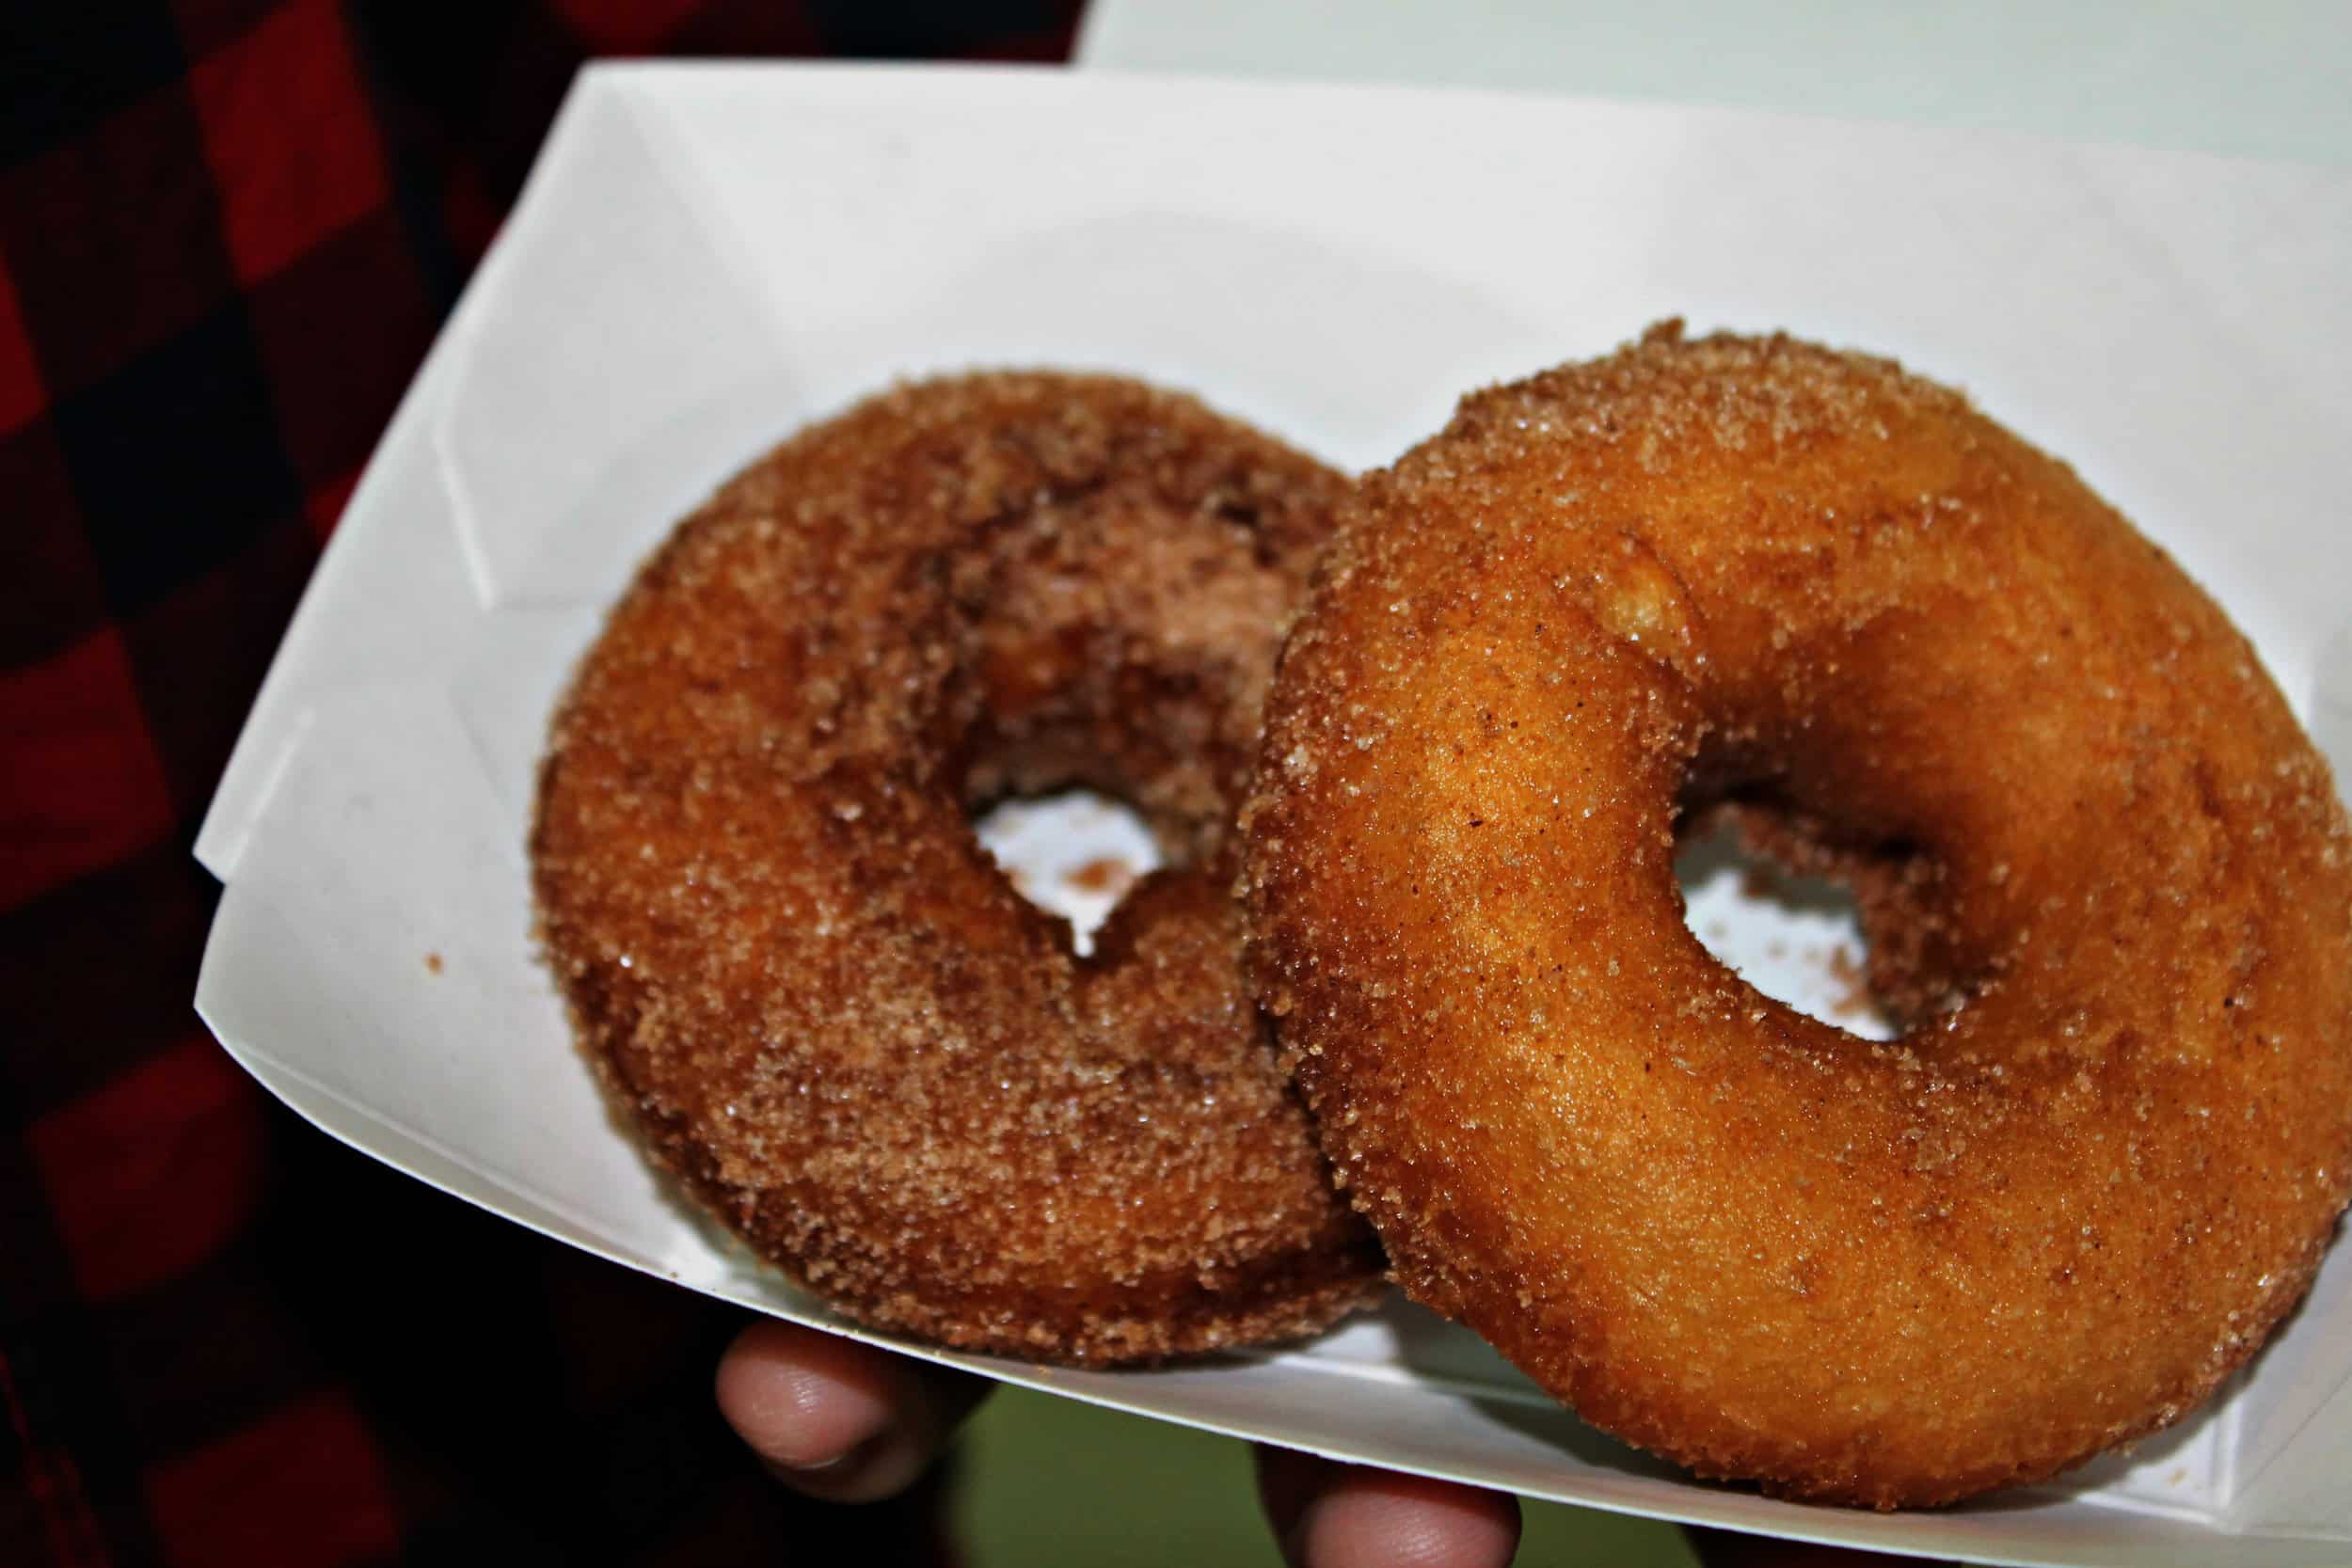 After picking a basket of apples, go satisfy your sweet tooth by grabbing a couple of fresh fried apple cider donuts, they are only $1 each. These treats are something that anyone from North Greenville University would enjoy and the price is well wo